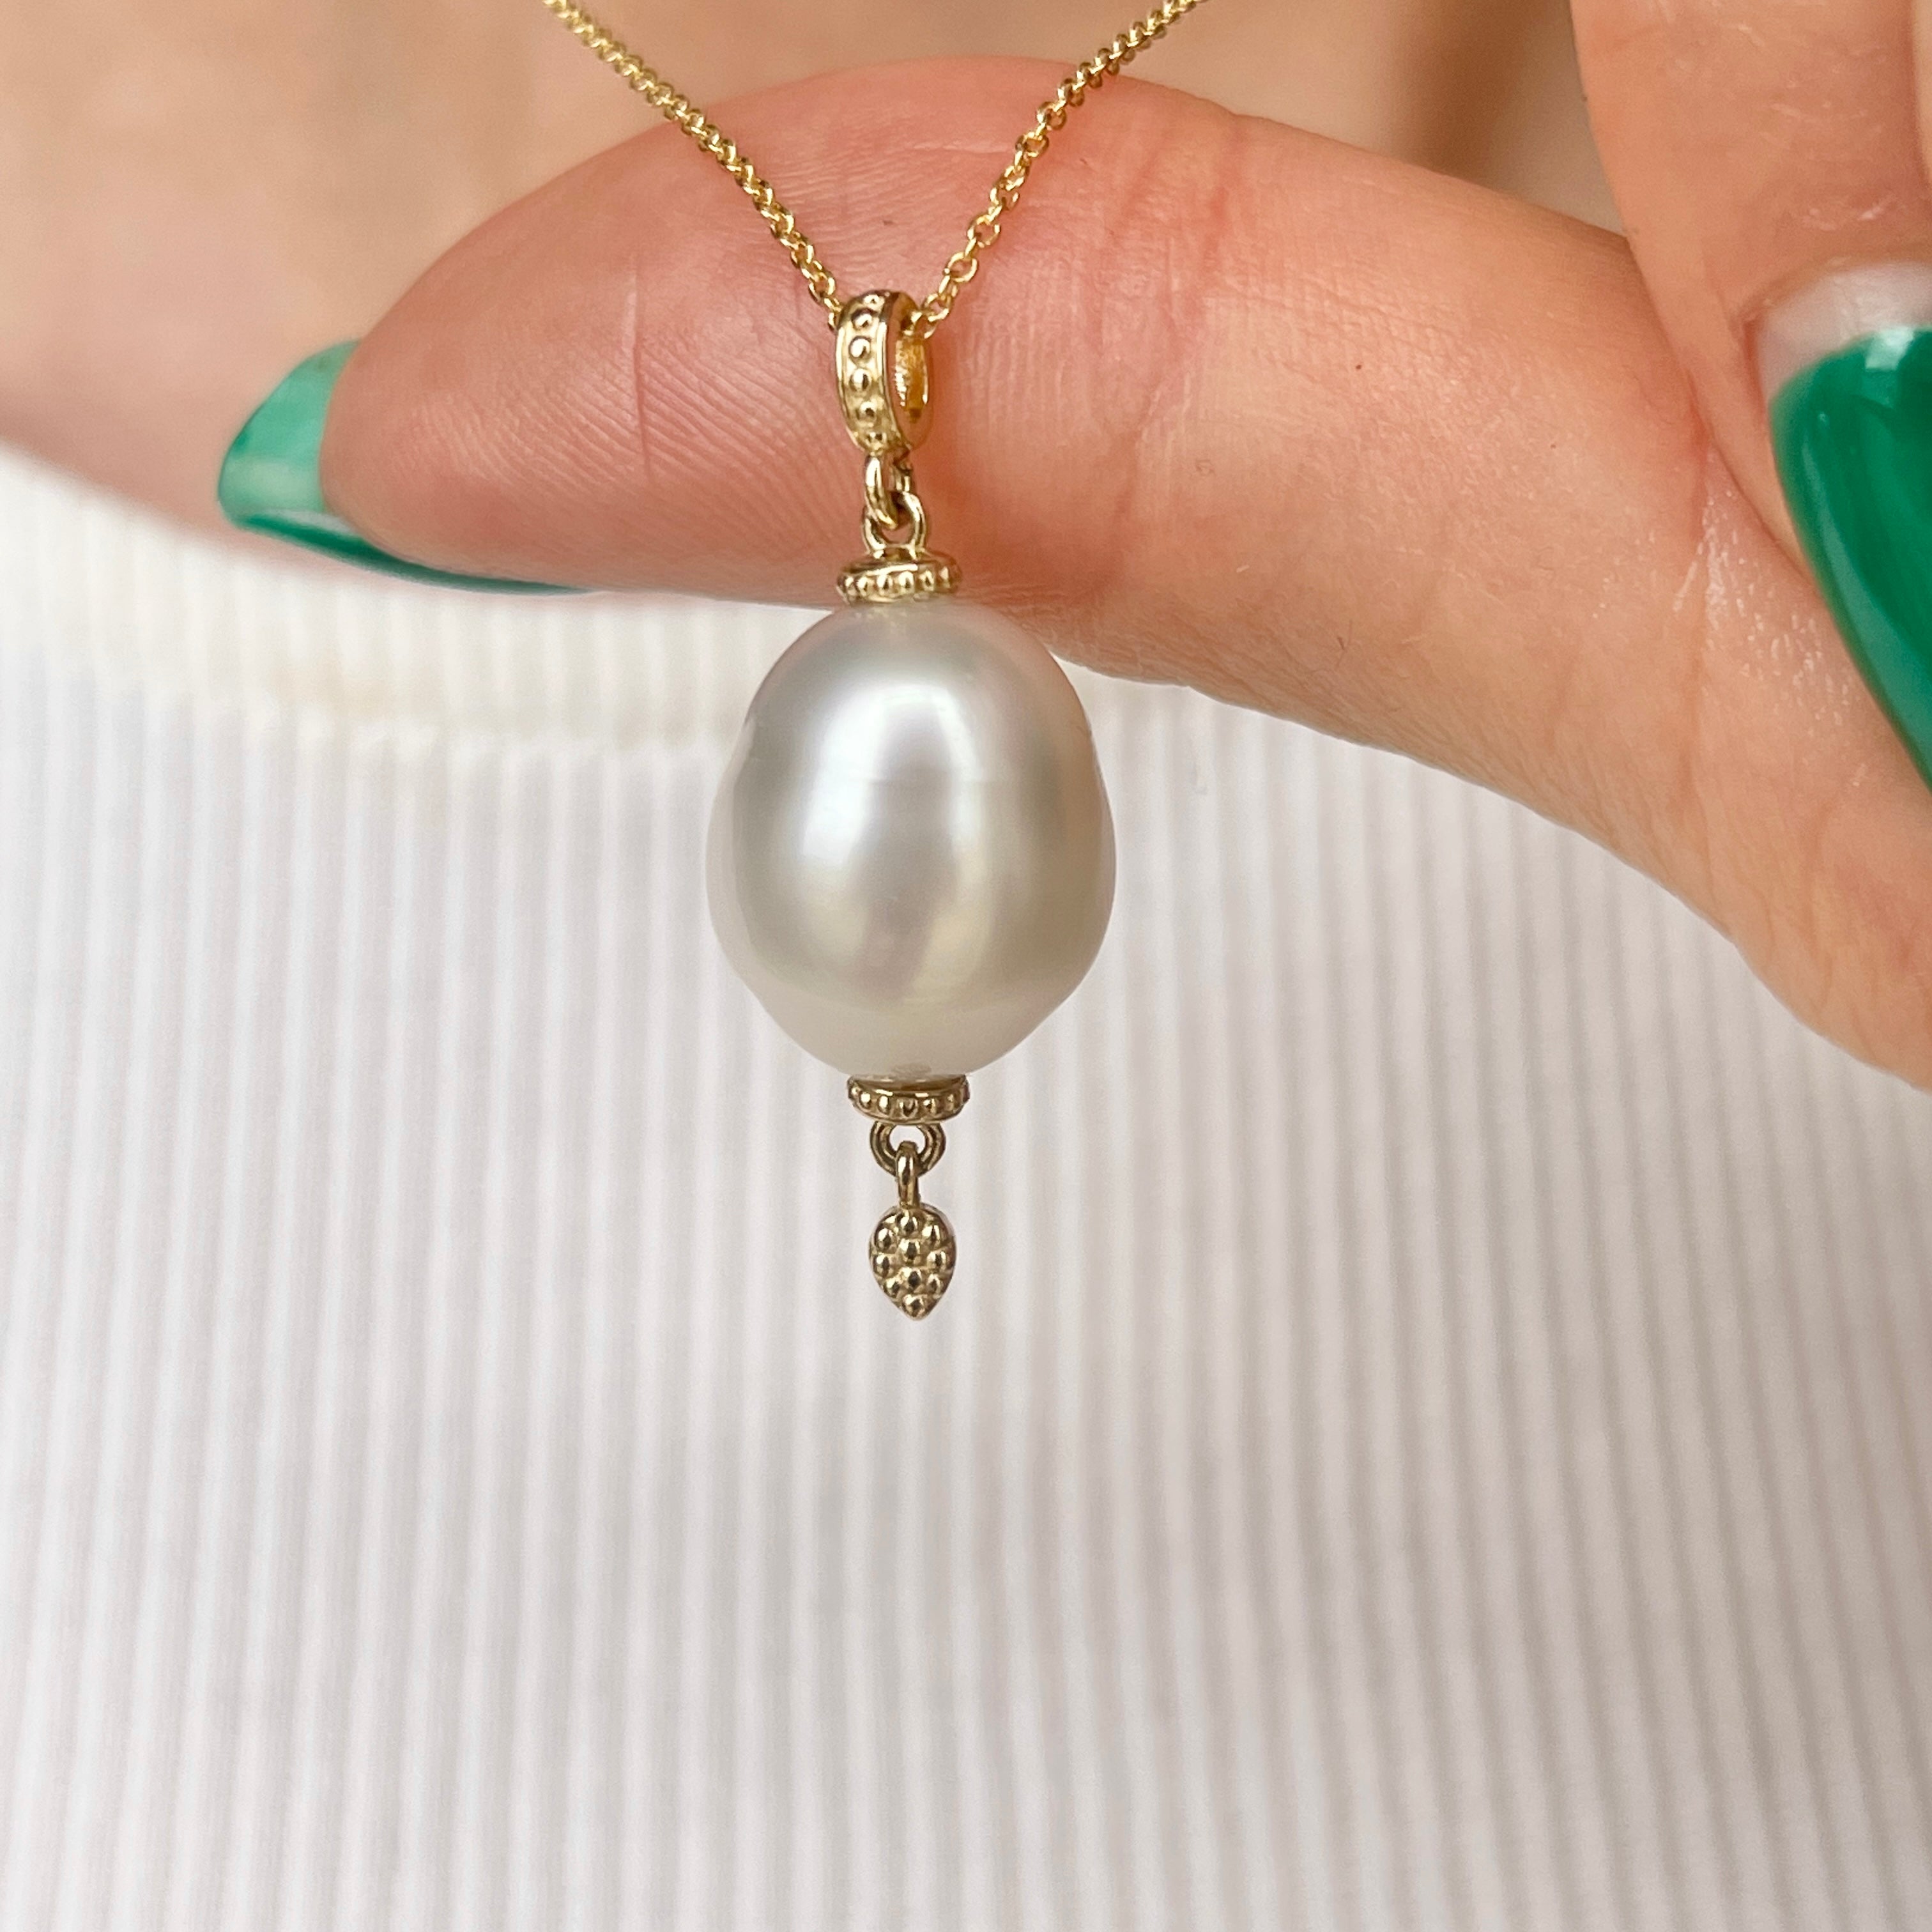 Baroque south sea pearl necklace by Paspaley (Co.) on artnet